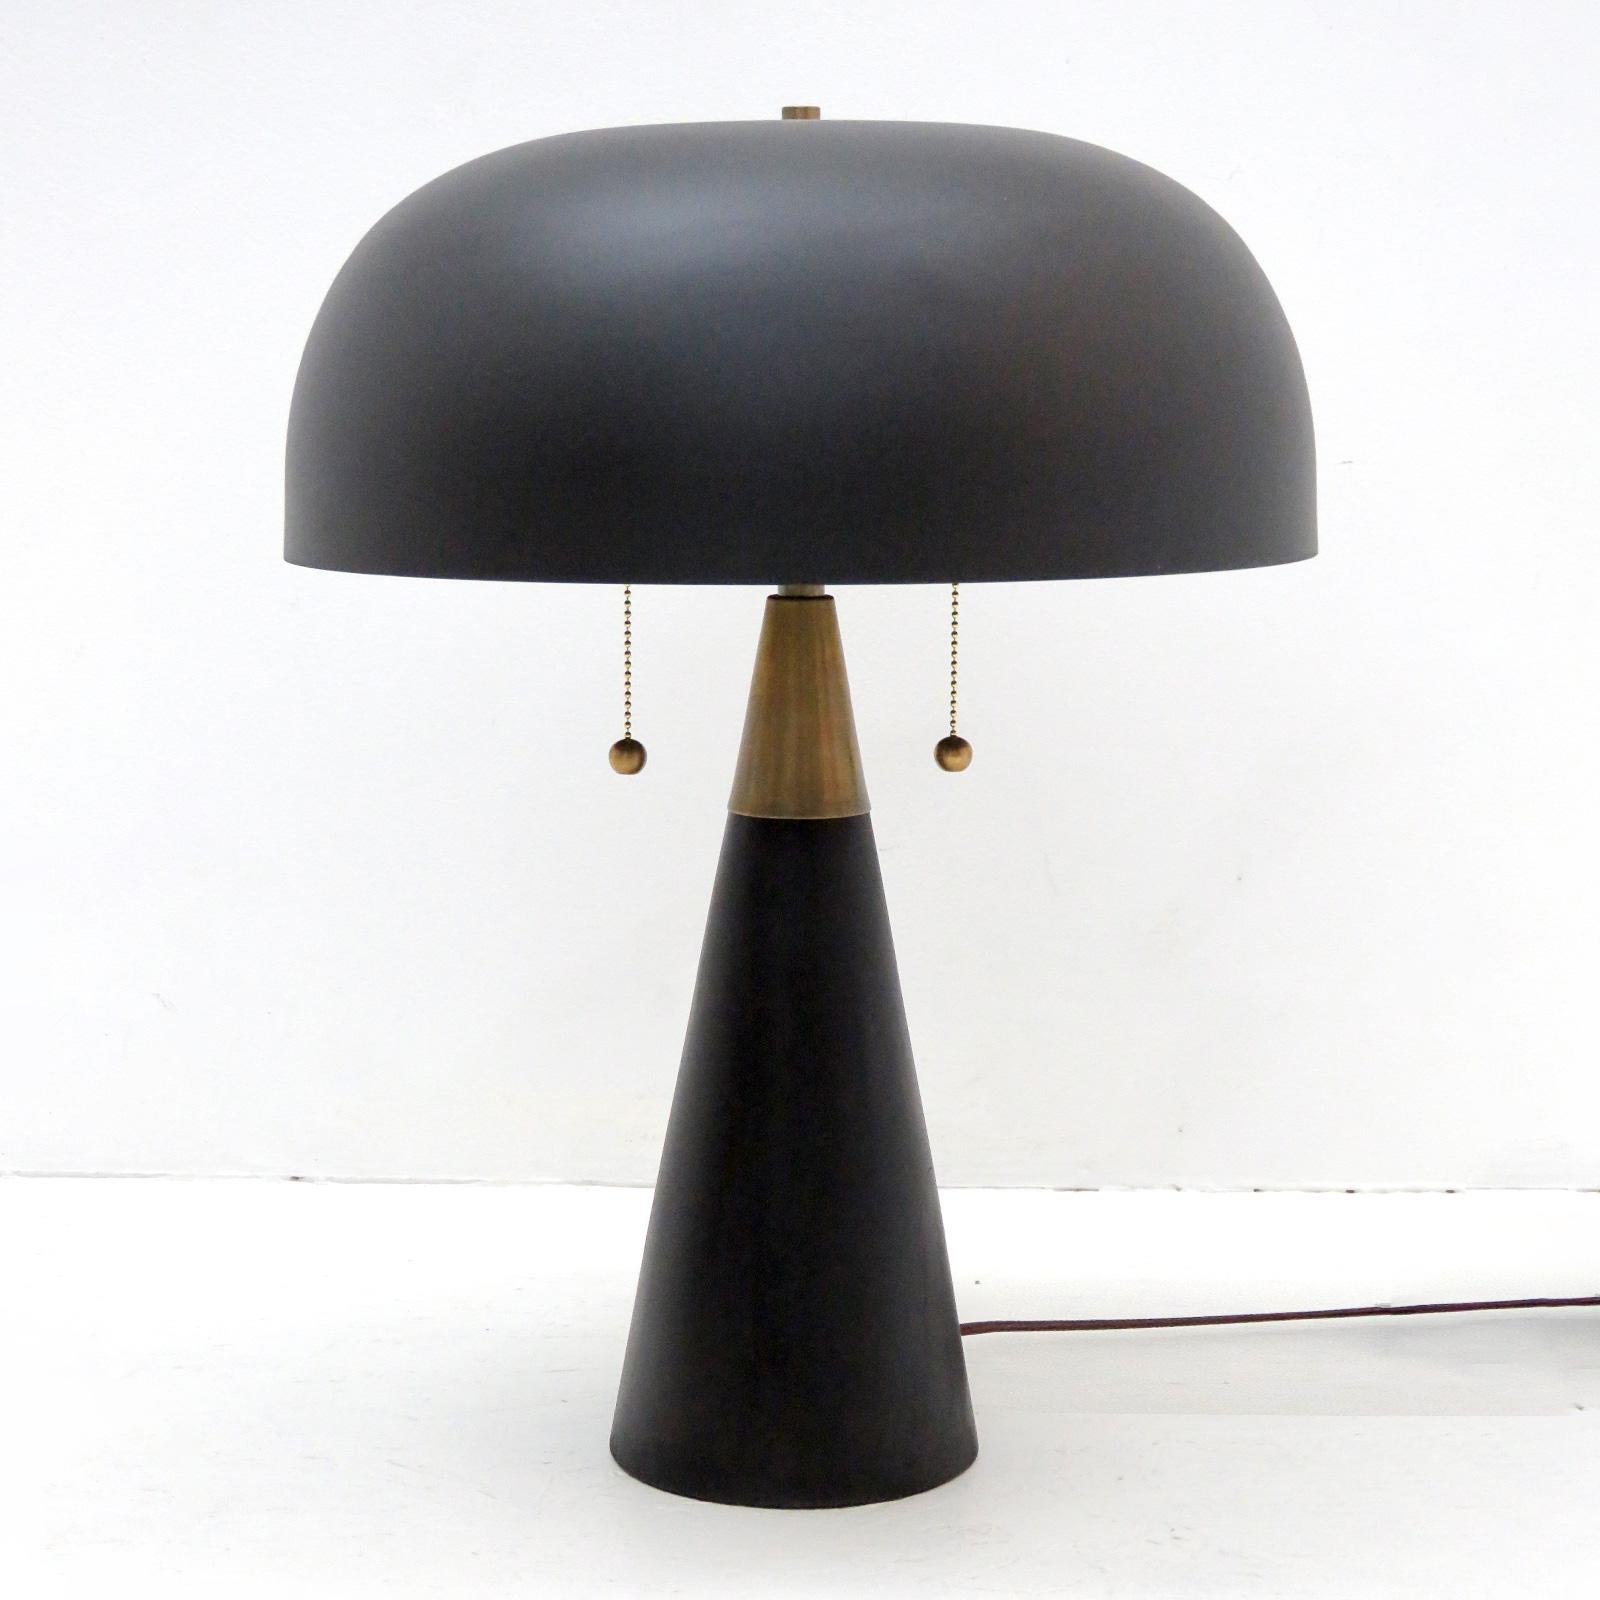 Wonderful pair of organic modern table lamps by Alvaro Benitez for Gallery L7, with a blackened wood base, a large black powder-coated metal shade and brass hardware. Dual bulb setup with two individual pull switches and a general in-line on/off